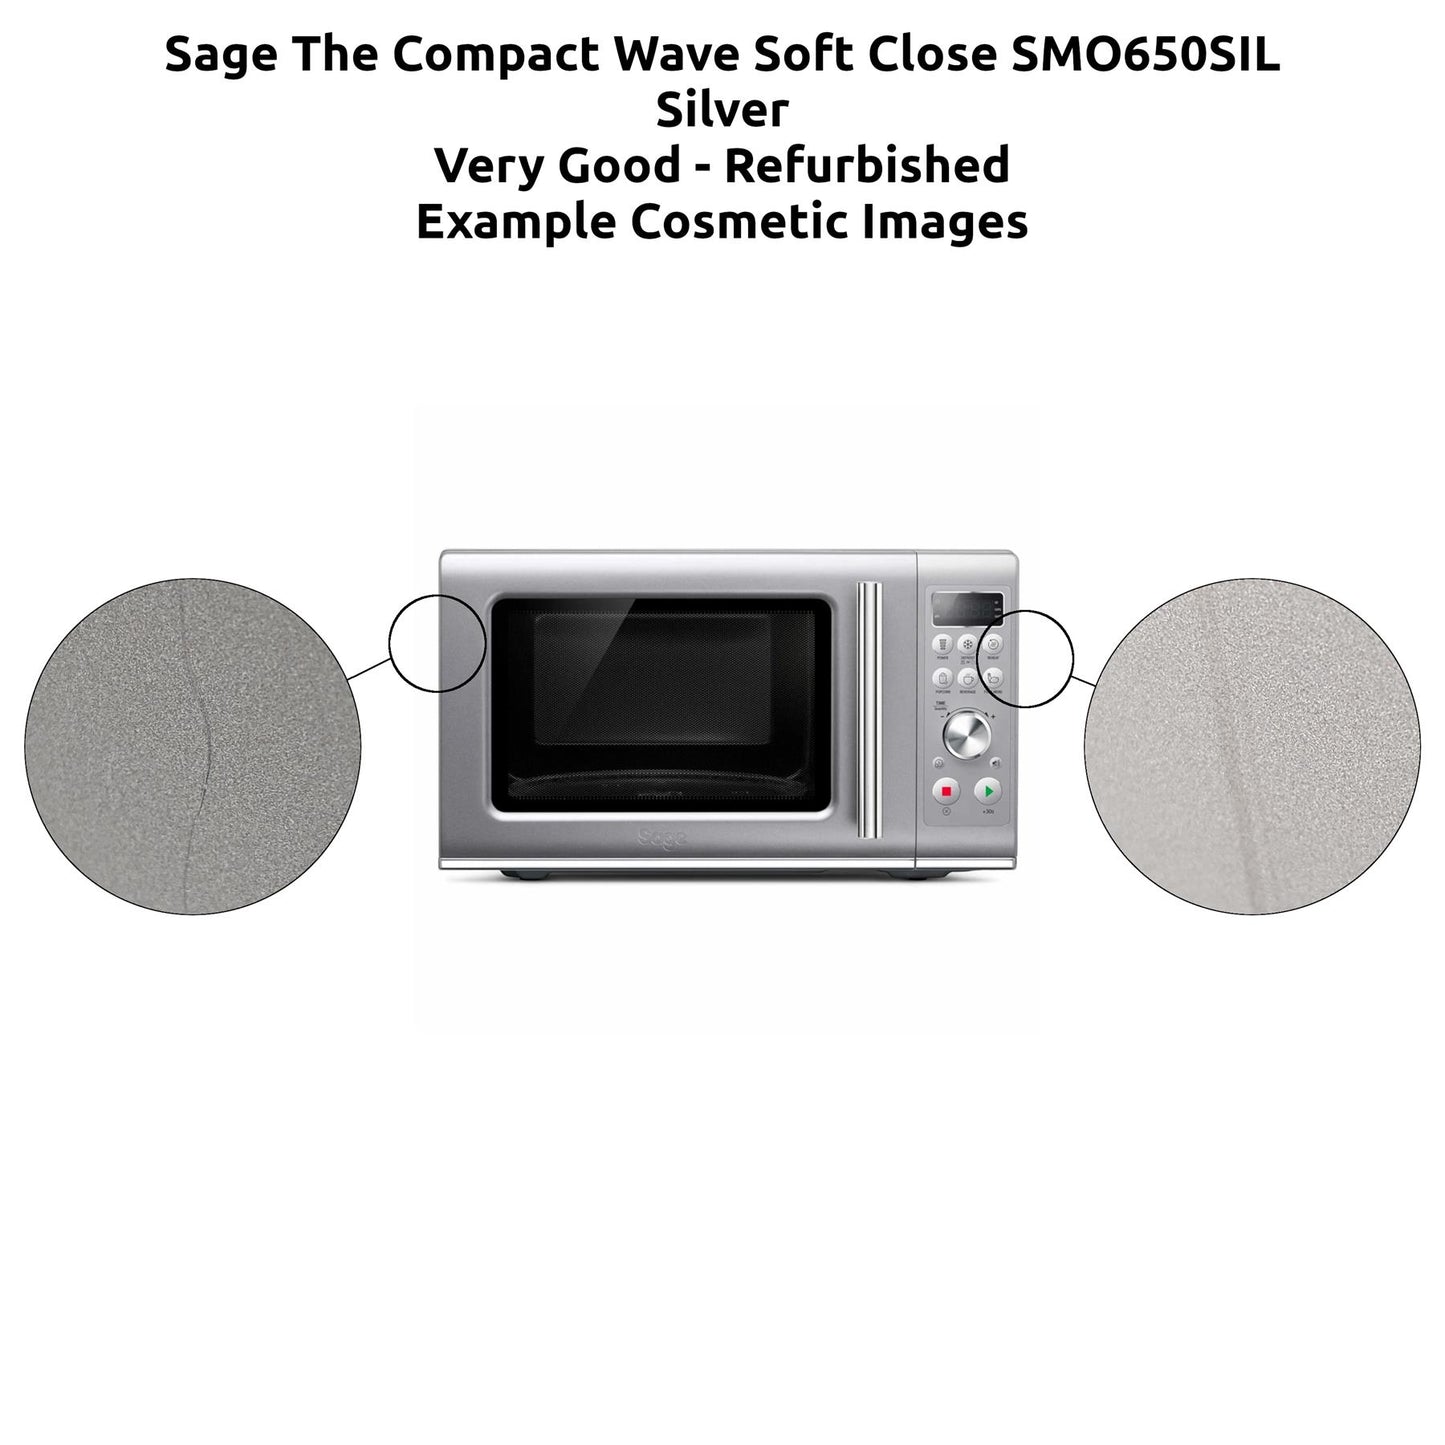 Sage The Compact Wave Soft Close SMO650 Microwave